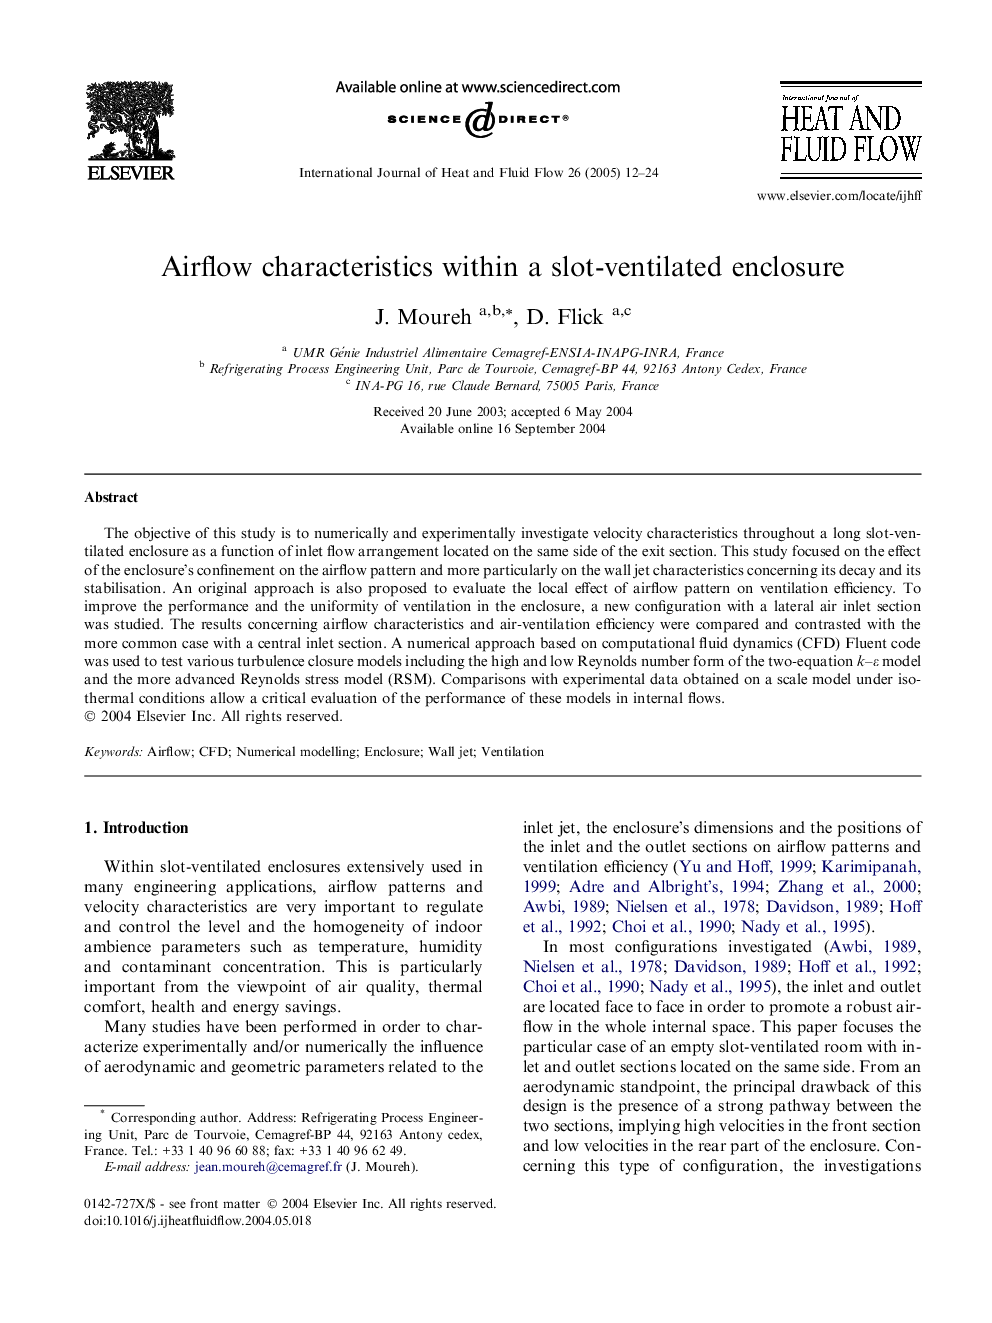 Airflow characteristics within a slot-ventilated enclosure